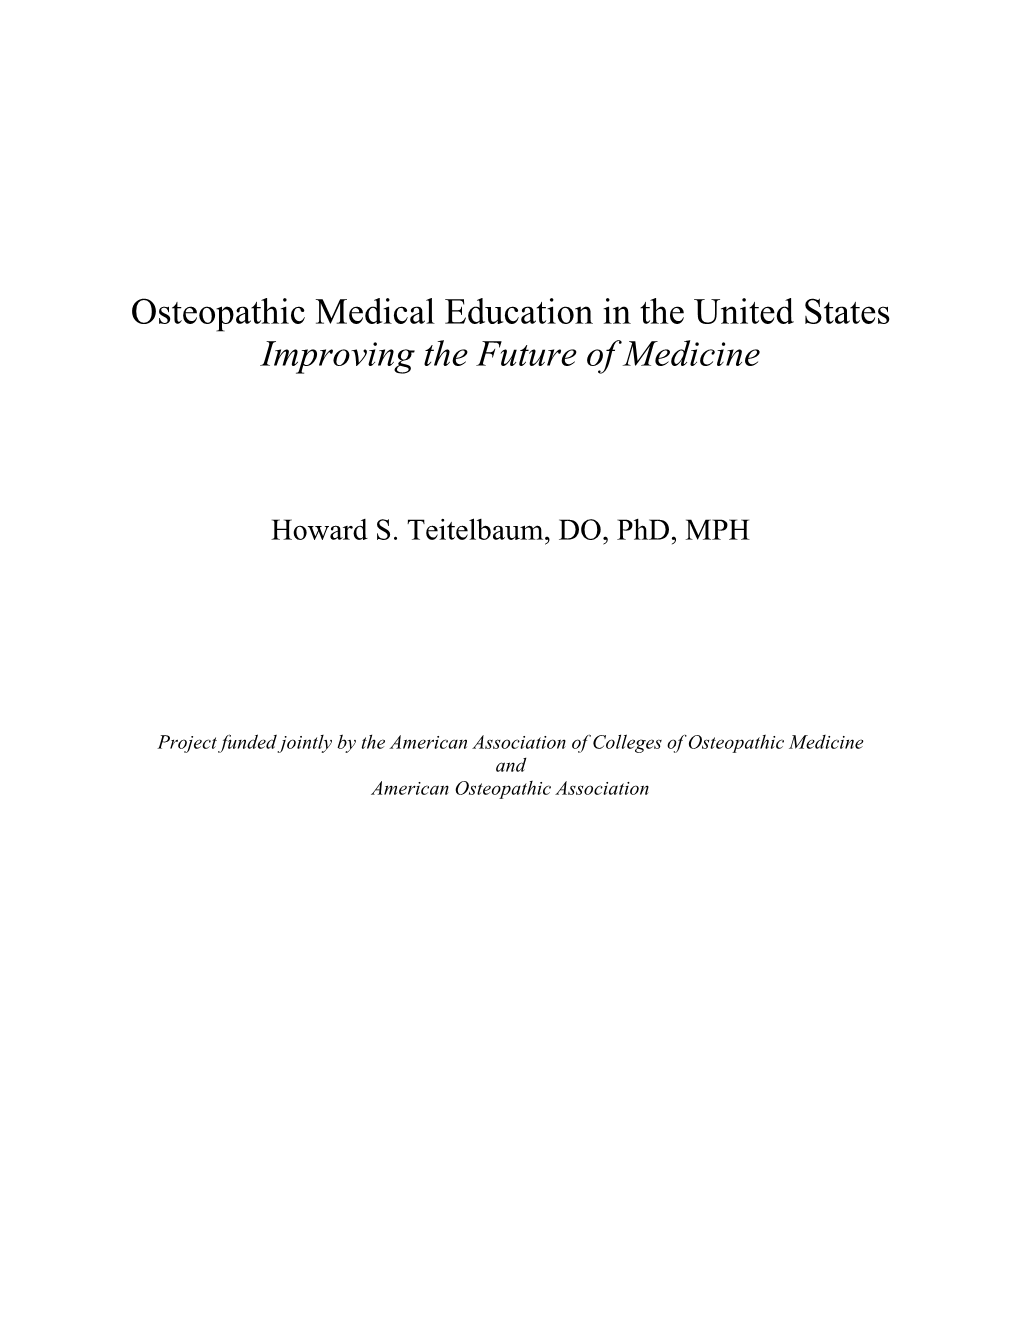 Osteopathic Medical Education in the United States Improving the Future of Medicine